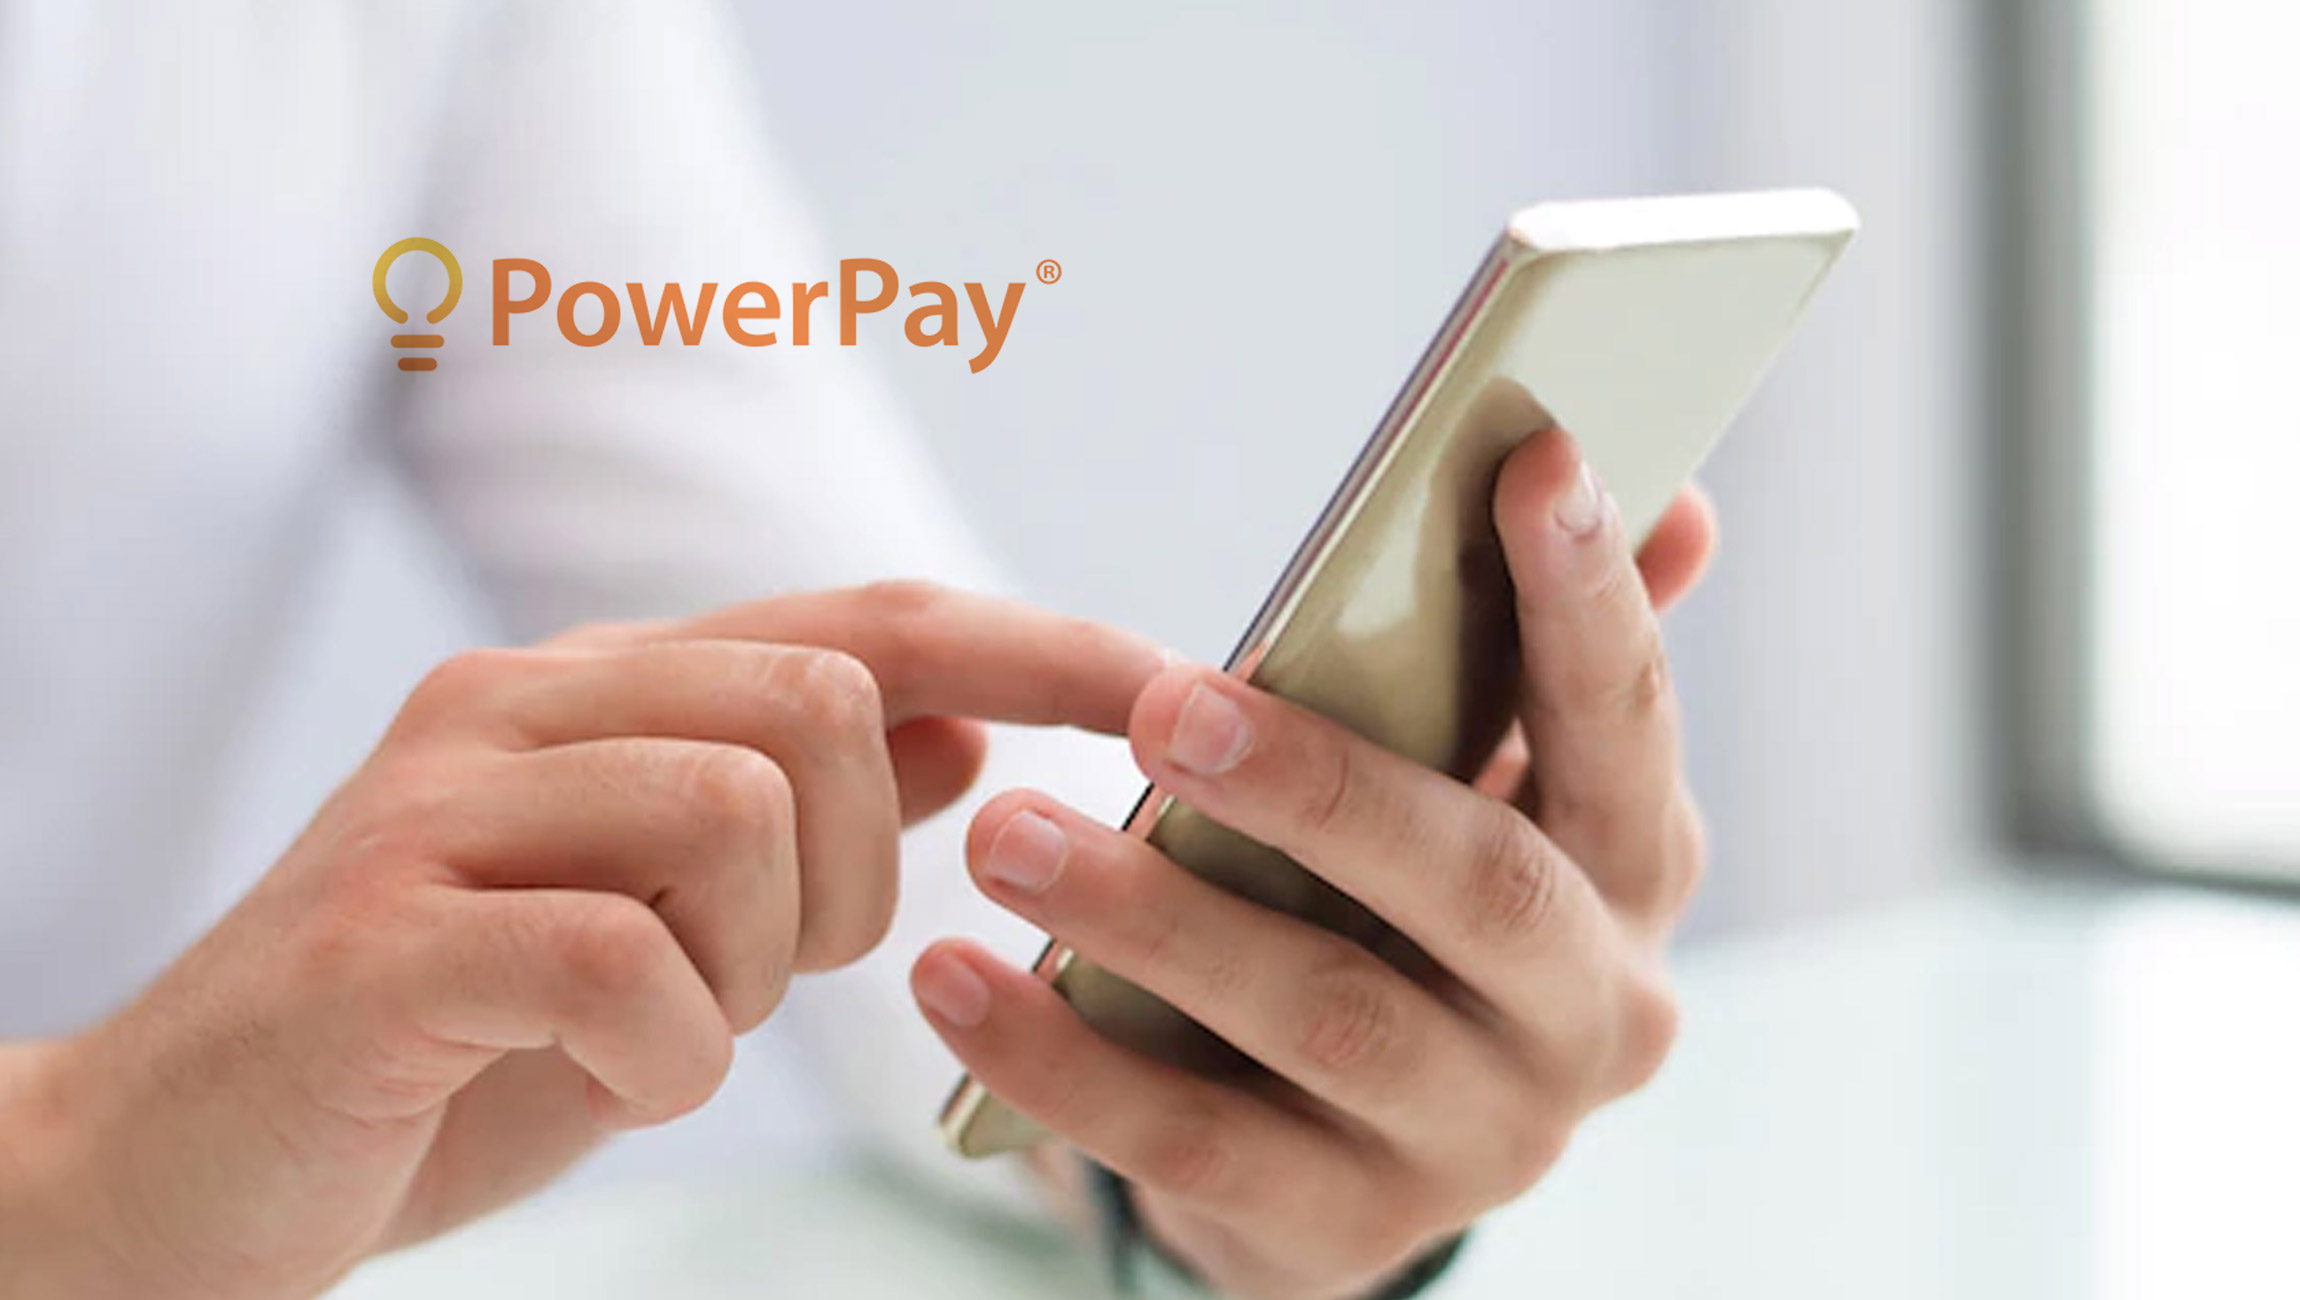 PowerPay Announces the Hiring of Greg Cicatelli to Lead Sales Division and Support Expansion Plans